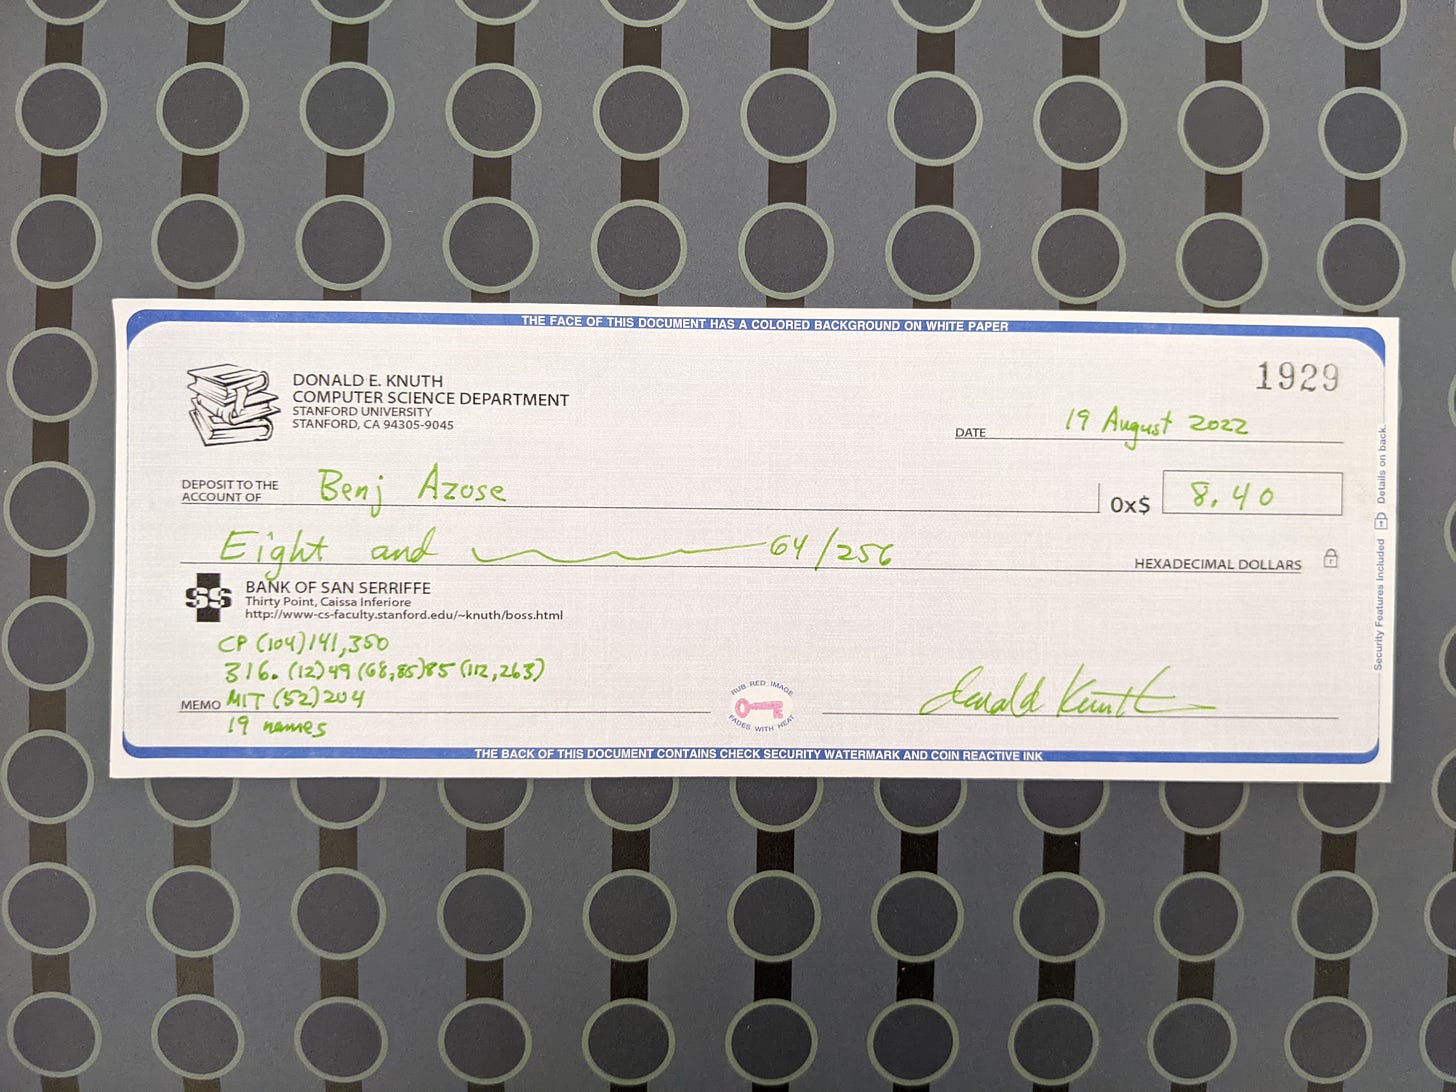 Check from Donald Knuth for 0x8.40, payable to Benj Azose. 